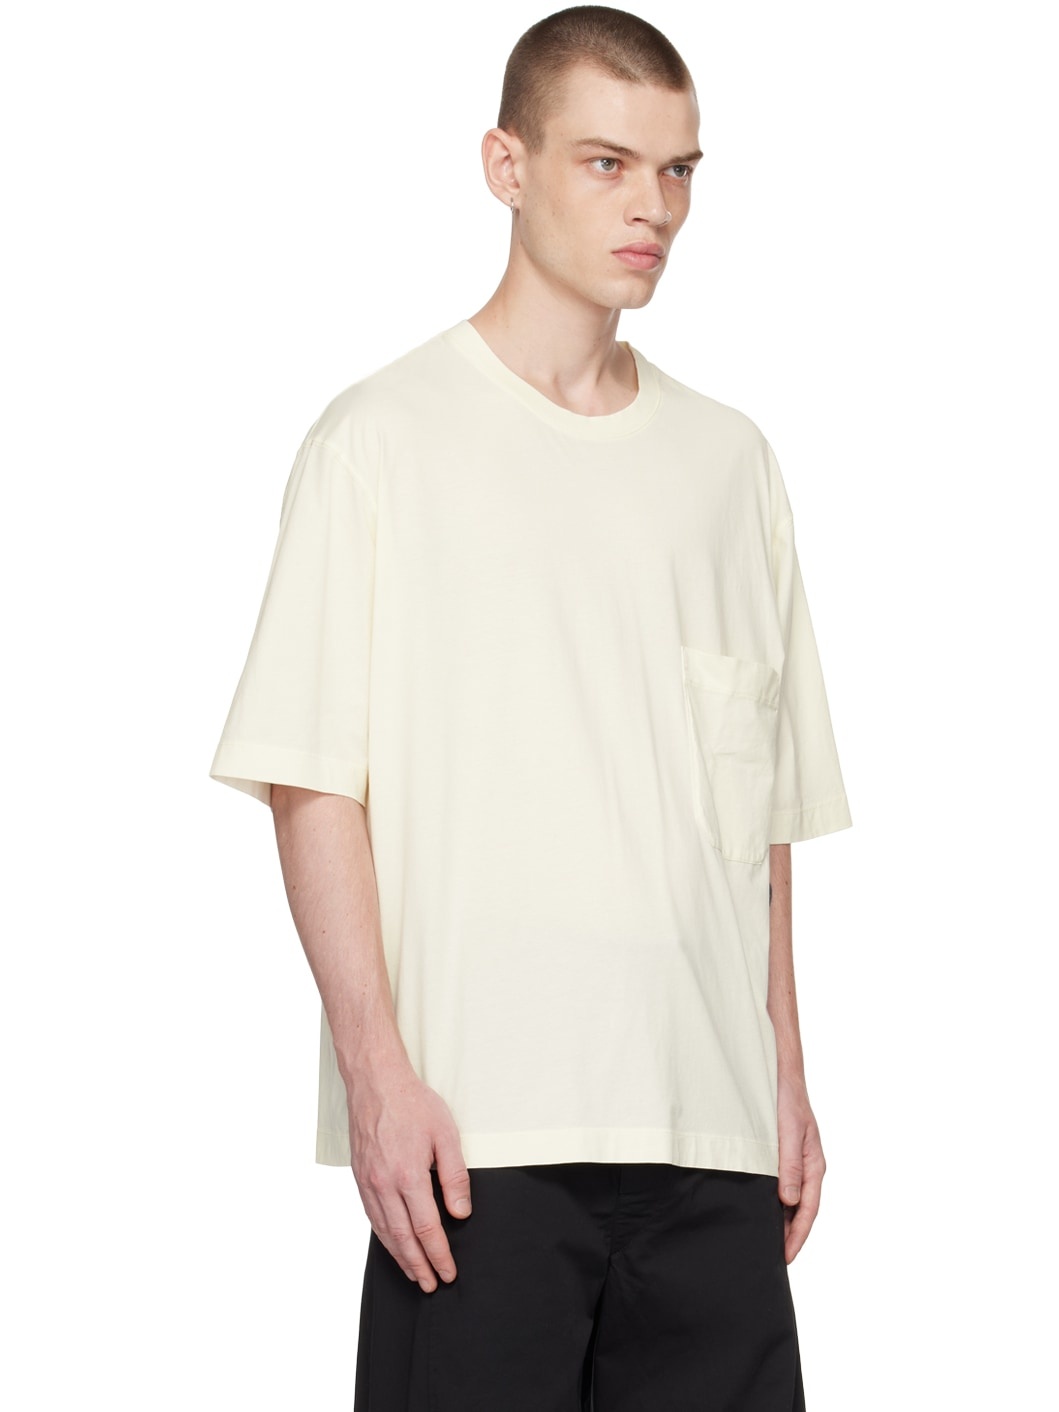 Off-White Garment-Dyed T-Shirt - 2